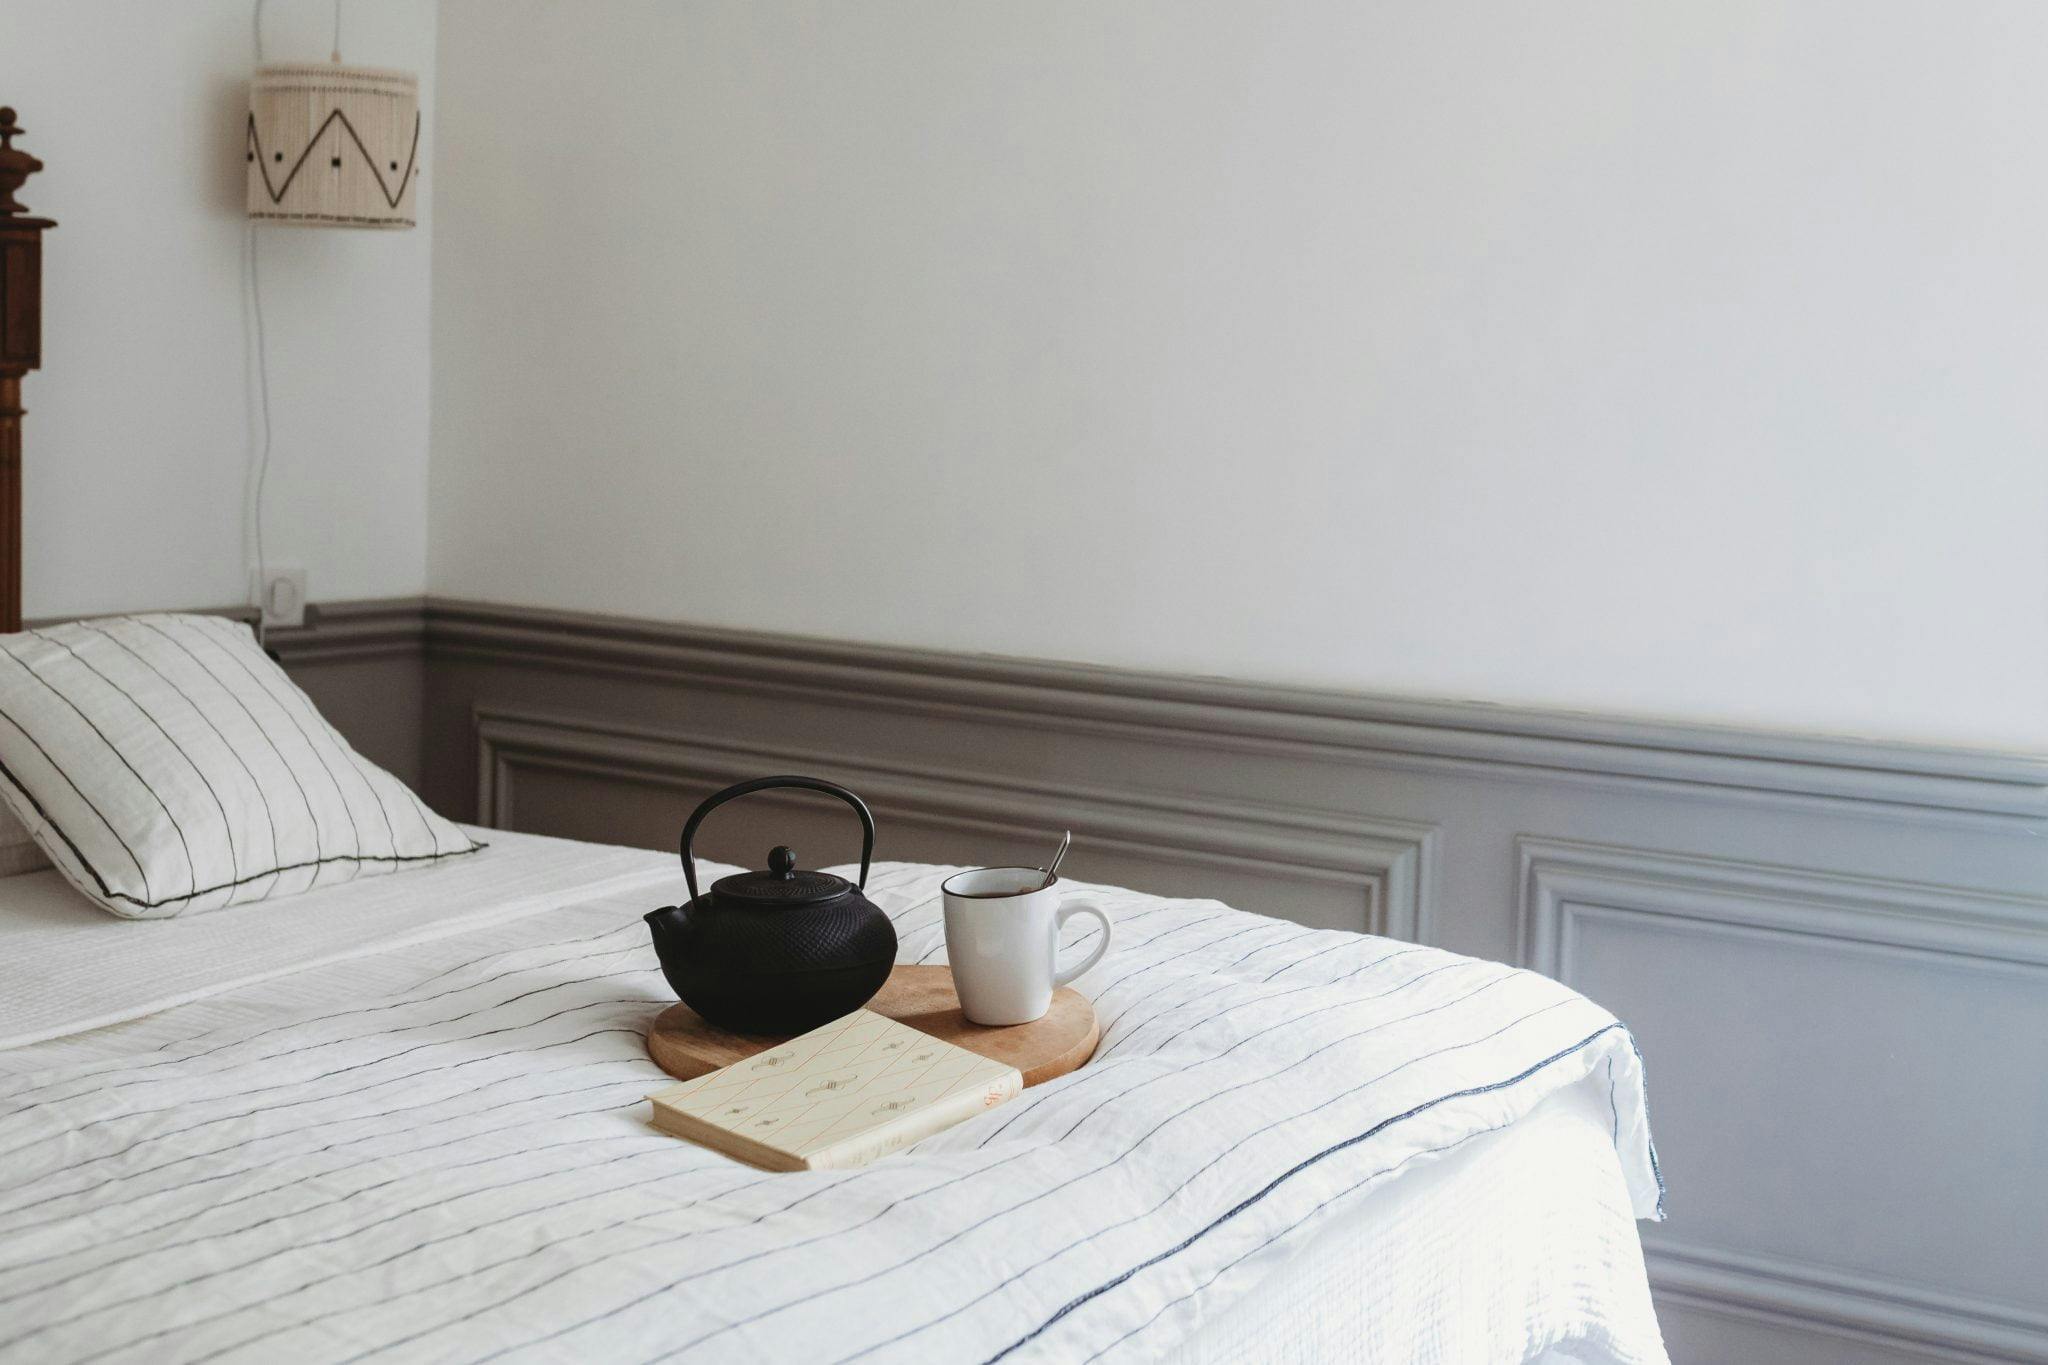 Bedroom atmosphere: tea and reading in the morning